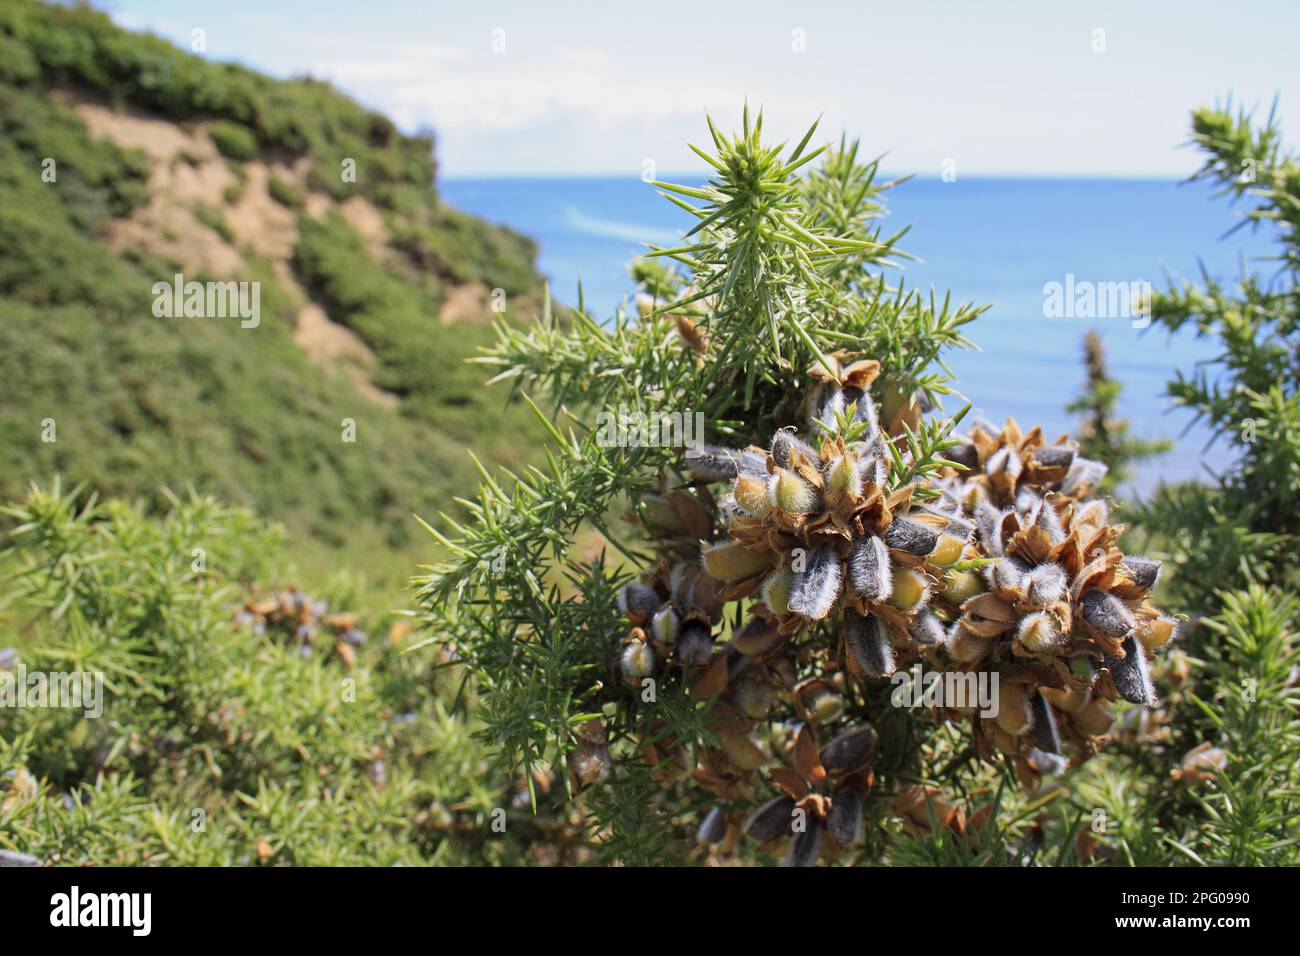 Common Gorse (Ulex europaeus) close-up of seedpods, growing in gulley of slumped sea cliff, Whitecliff Bay, Isle of Wight, England, United Kingdom Stock Photo